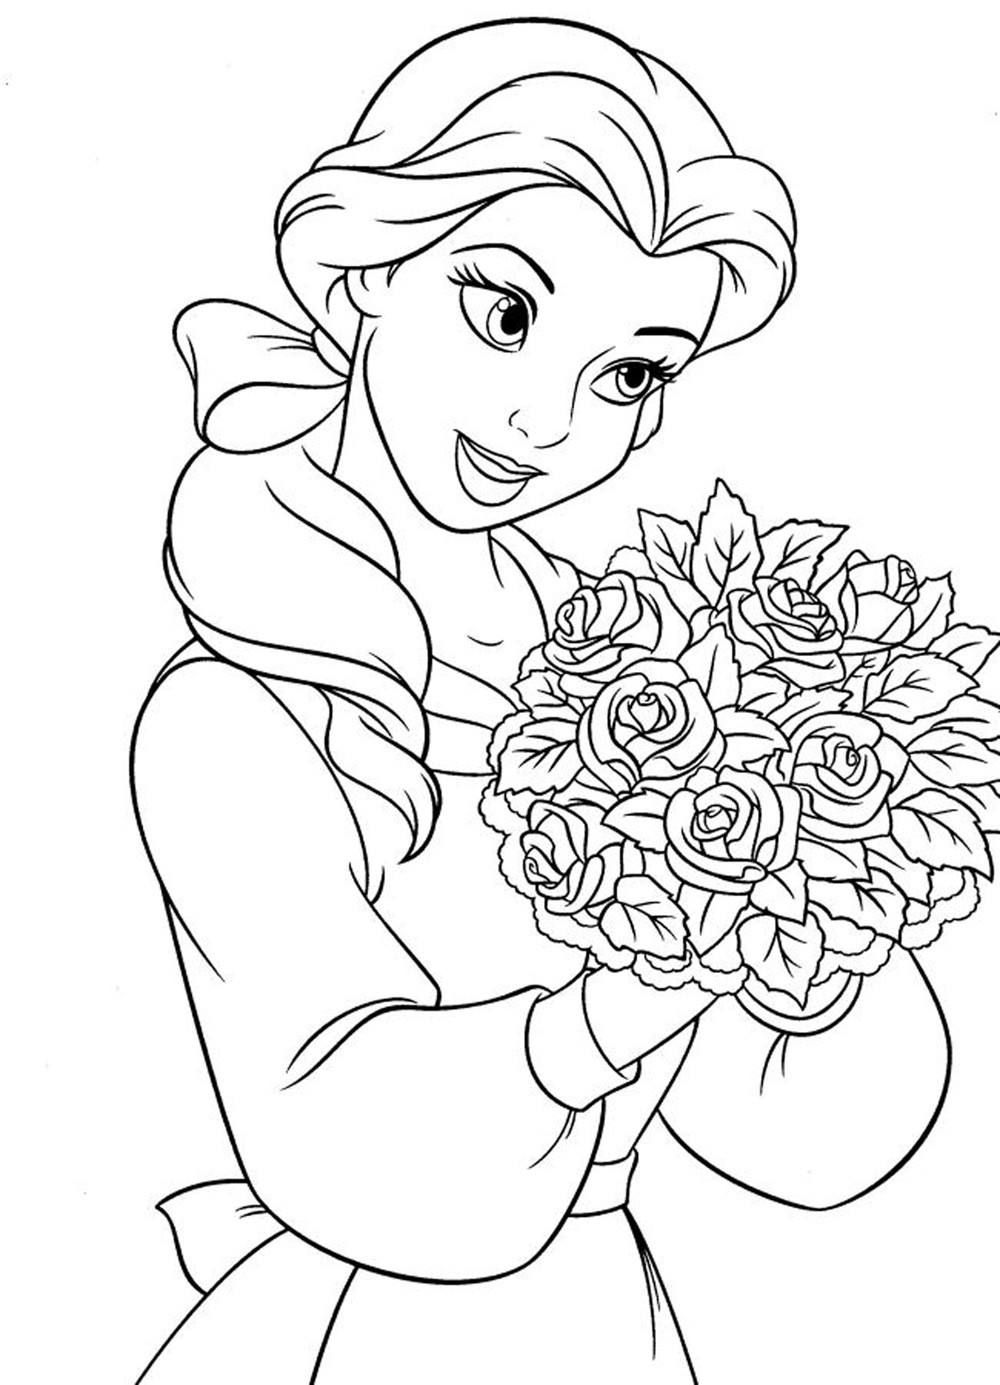 Printable Coloring Pages For Girls
 princess coloring pages for girls Free